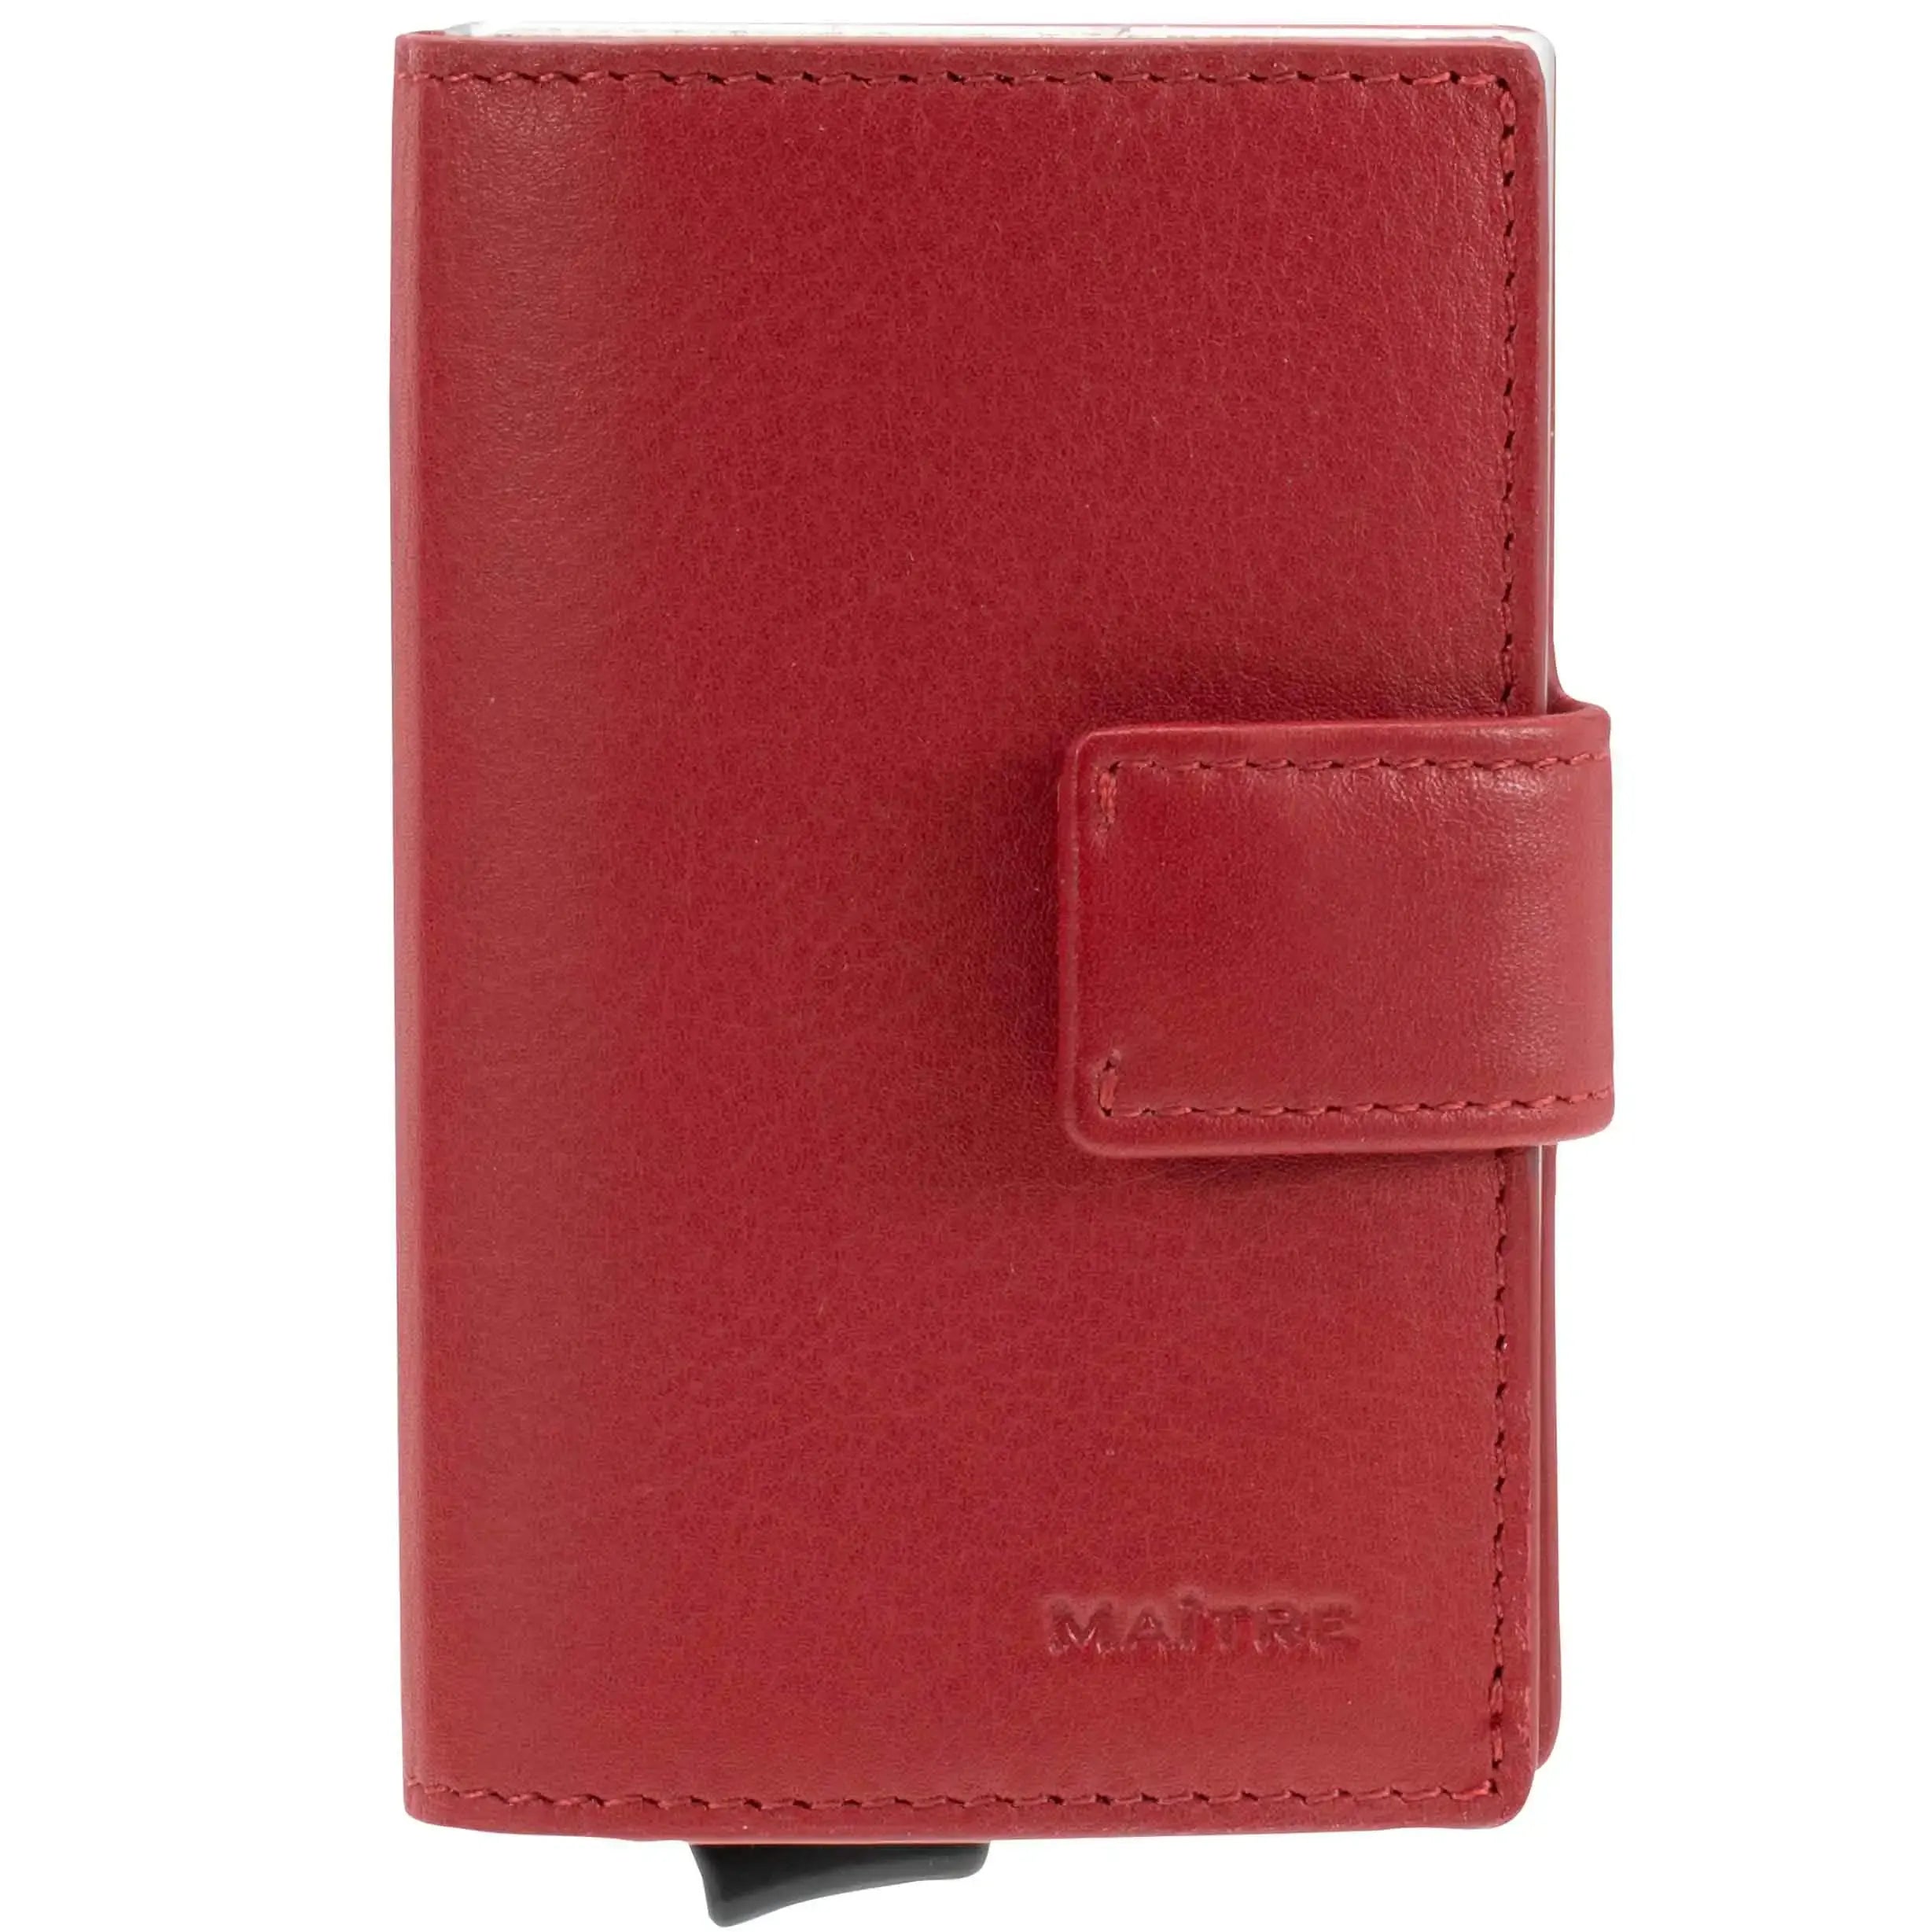 Maitre F3 C-Two E-Cage SV8 wallet 10 cm - Red